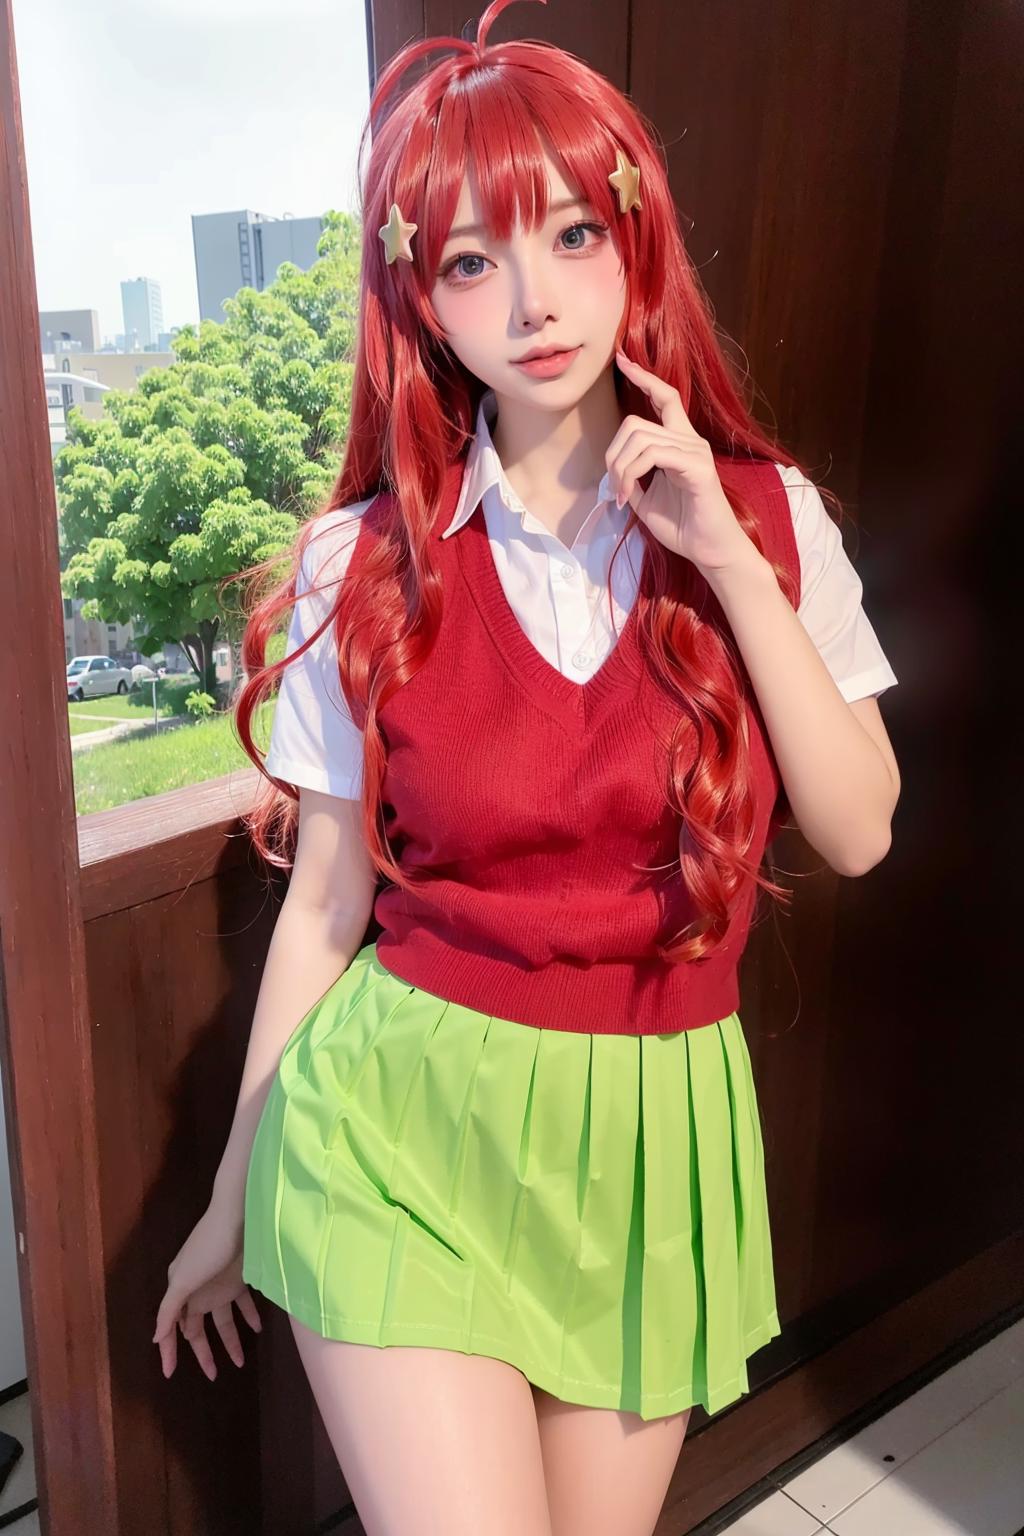 Nakano Itsuki in The Quintessential Quintuplets | Realistic LORA image by jappww